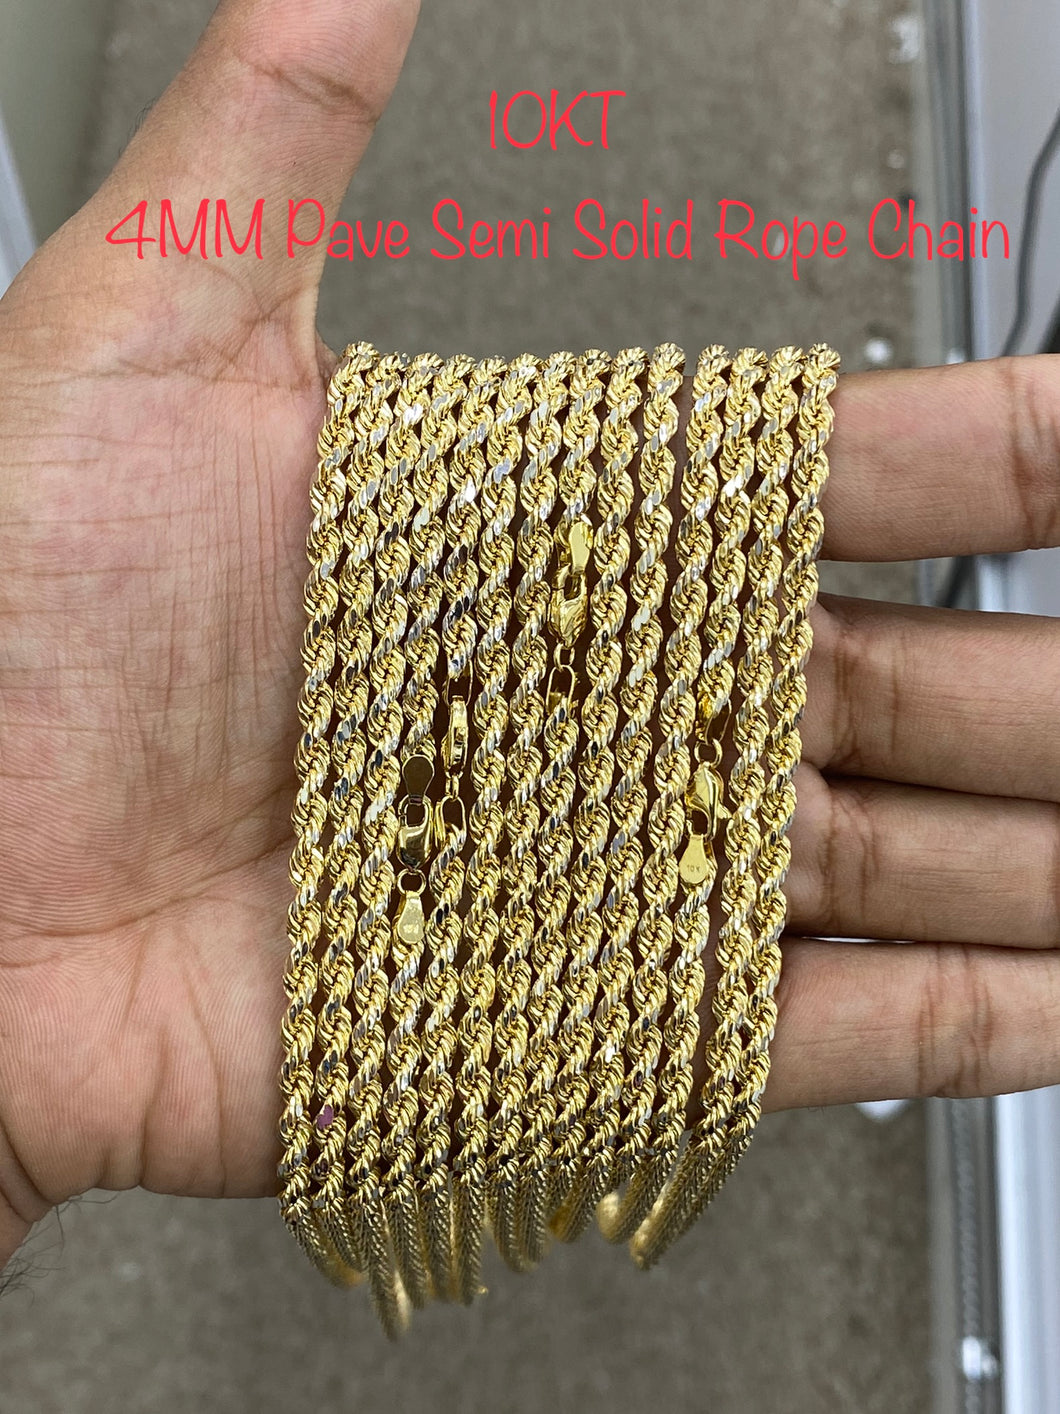 10KT 4MM Pave Semi Solid Rope Chain 18”-24”